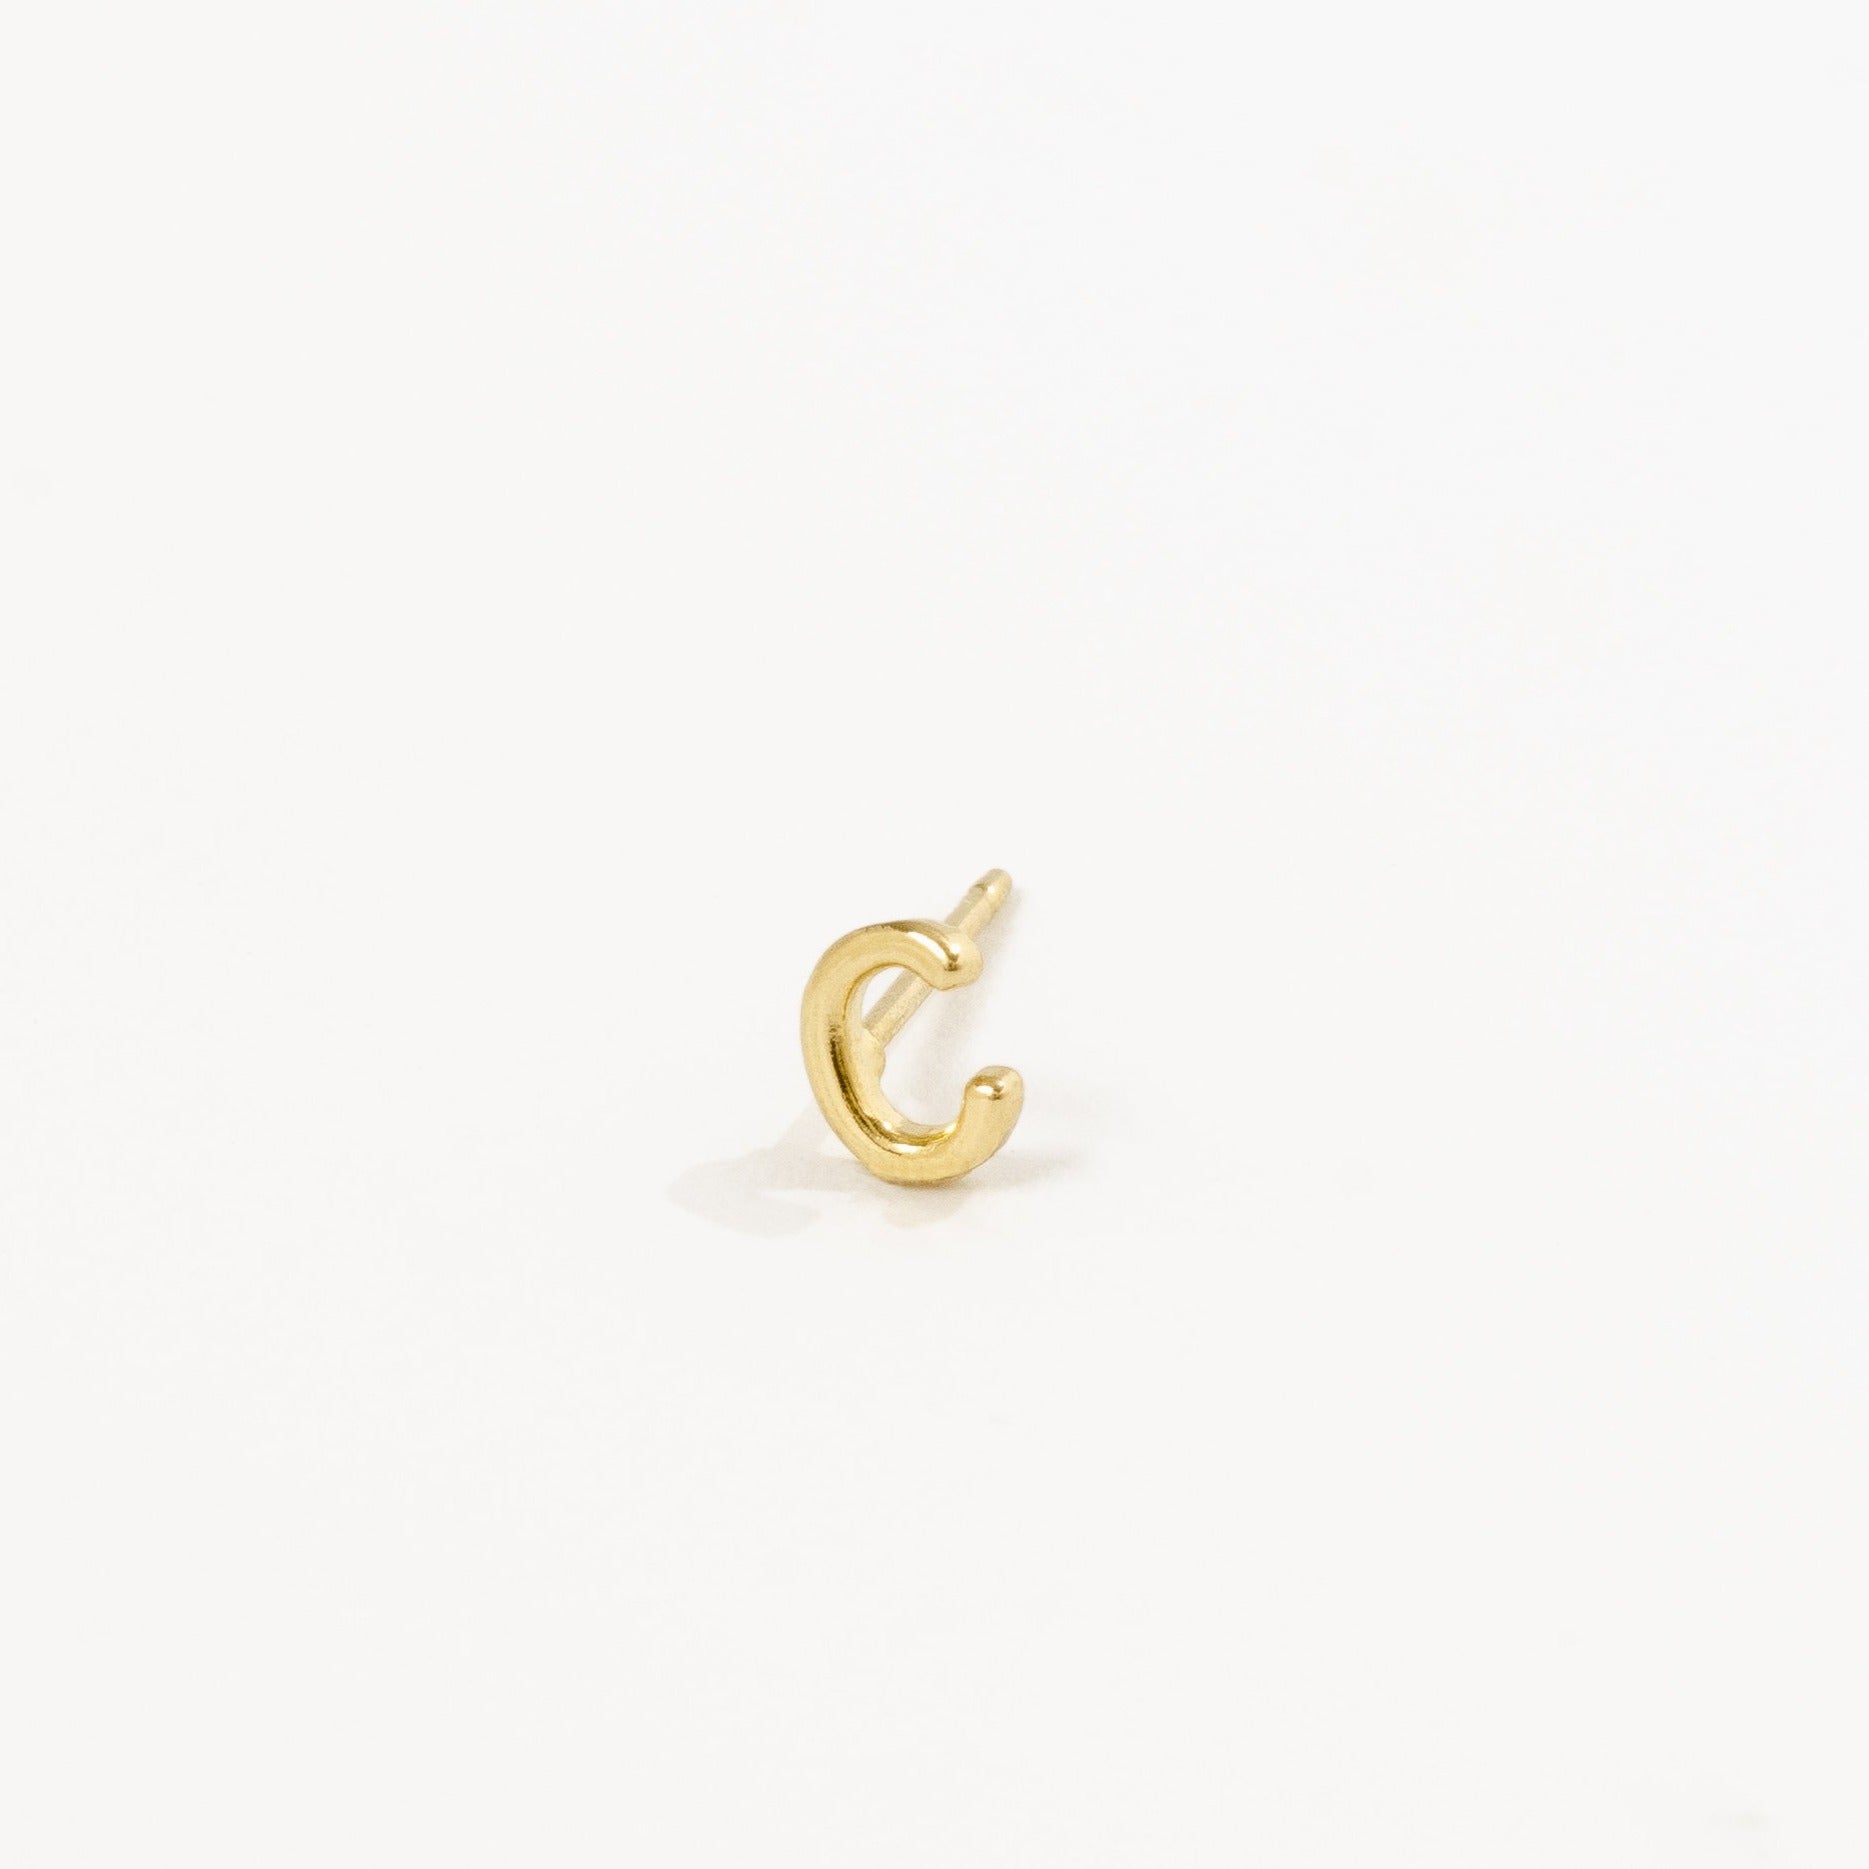 Gold C Initial Stud by Katie Dean Jewelry Dean Jewelry made in America